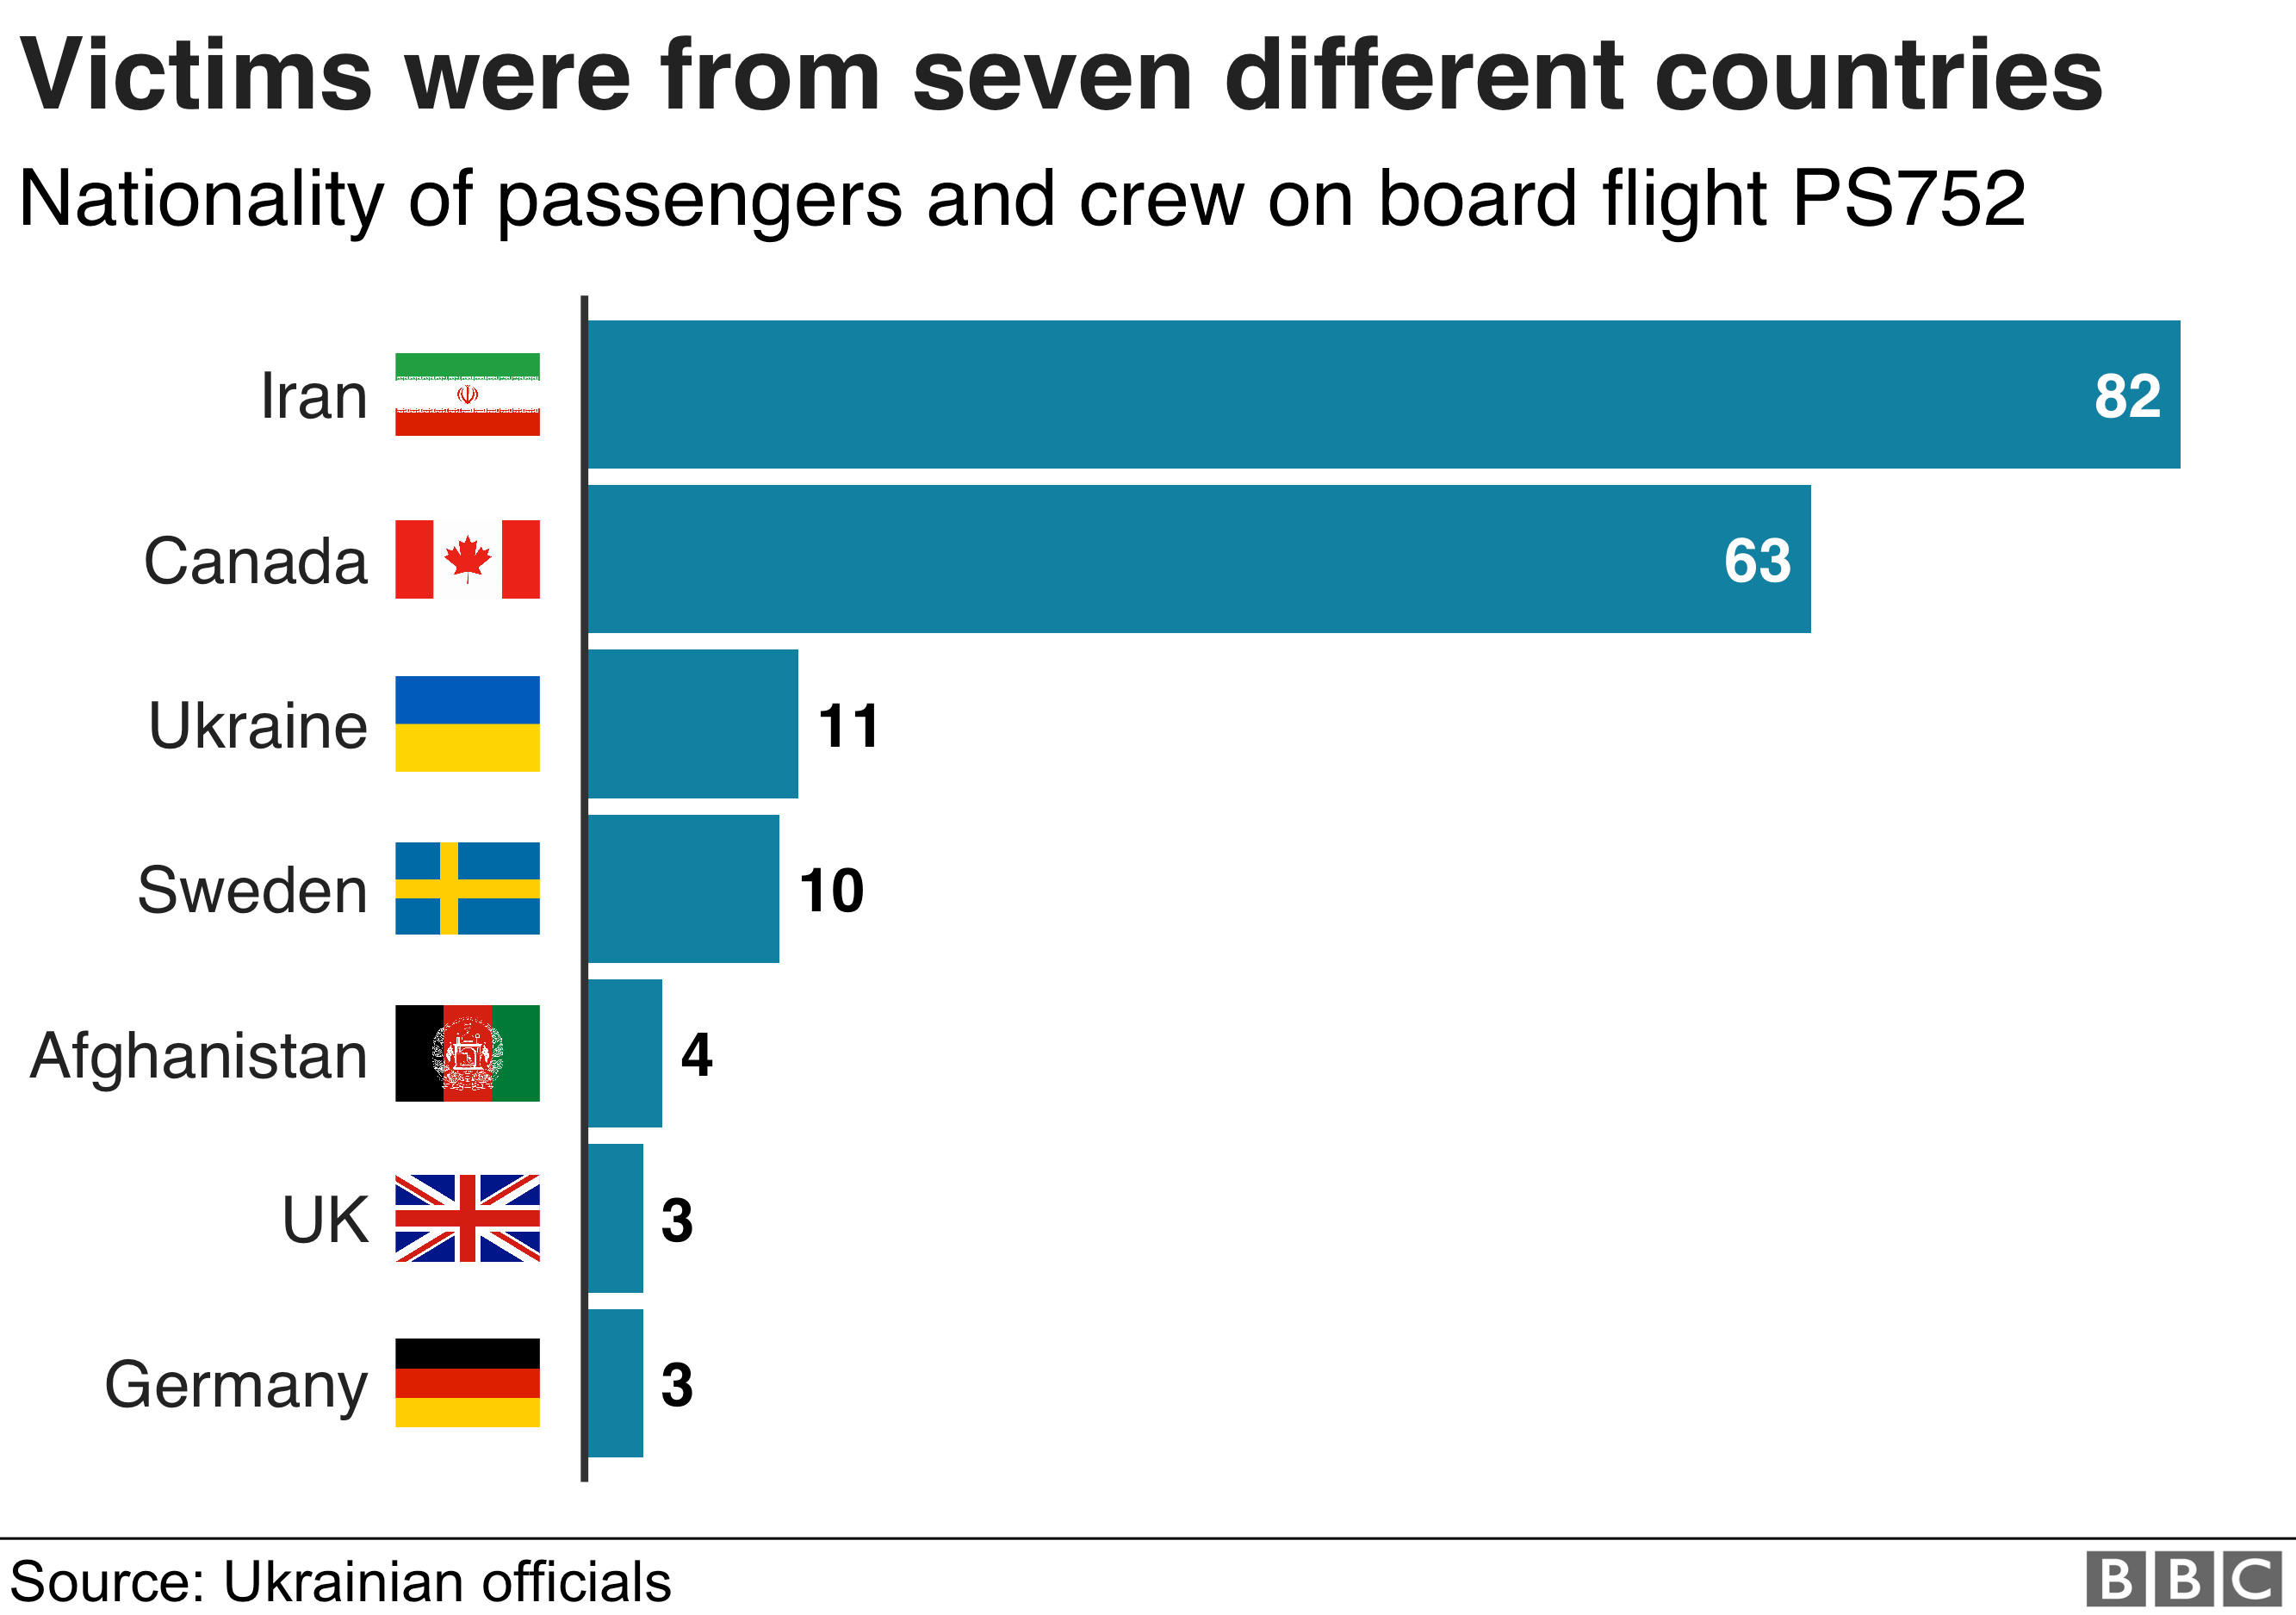 Chart showing the nationality of passengers and crew on board flight PS752